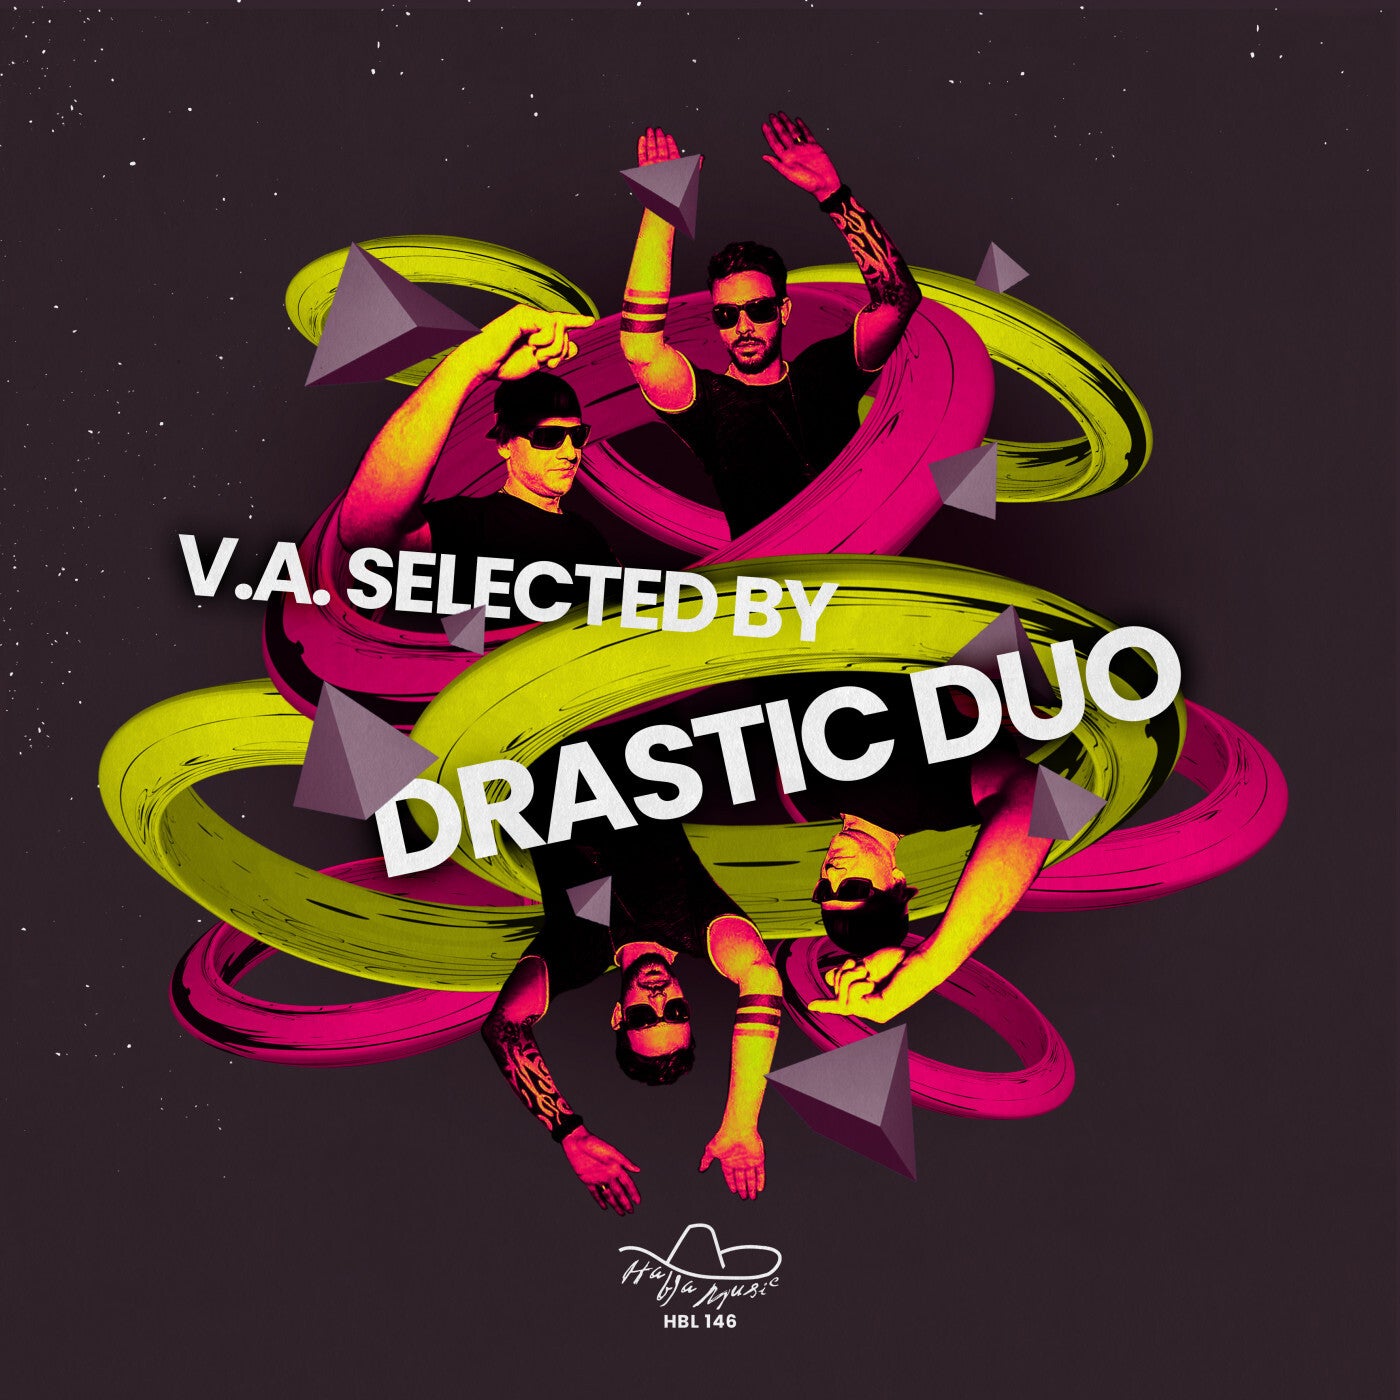 VA - V.A. Selected By Drastic Duo [HL146]